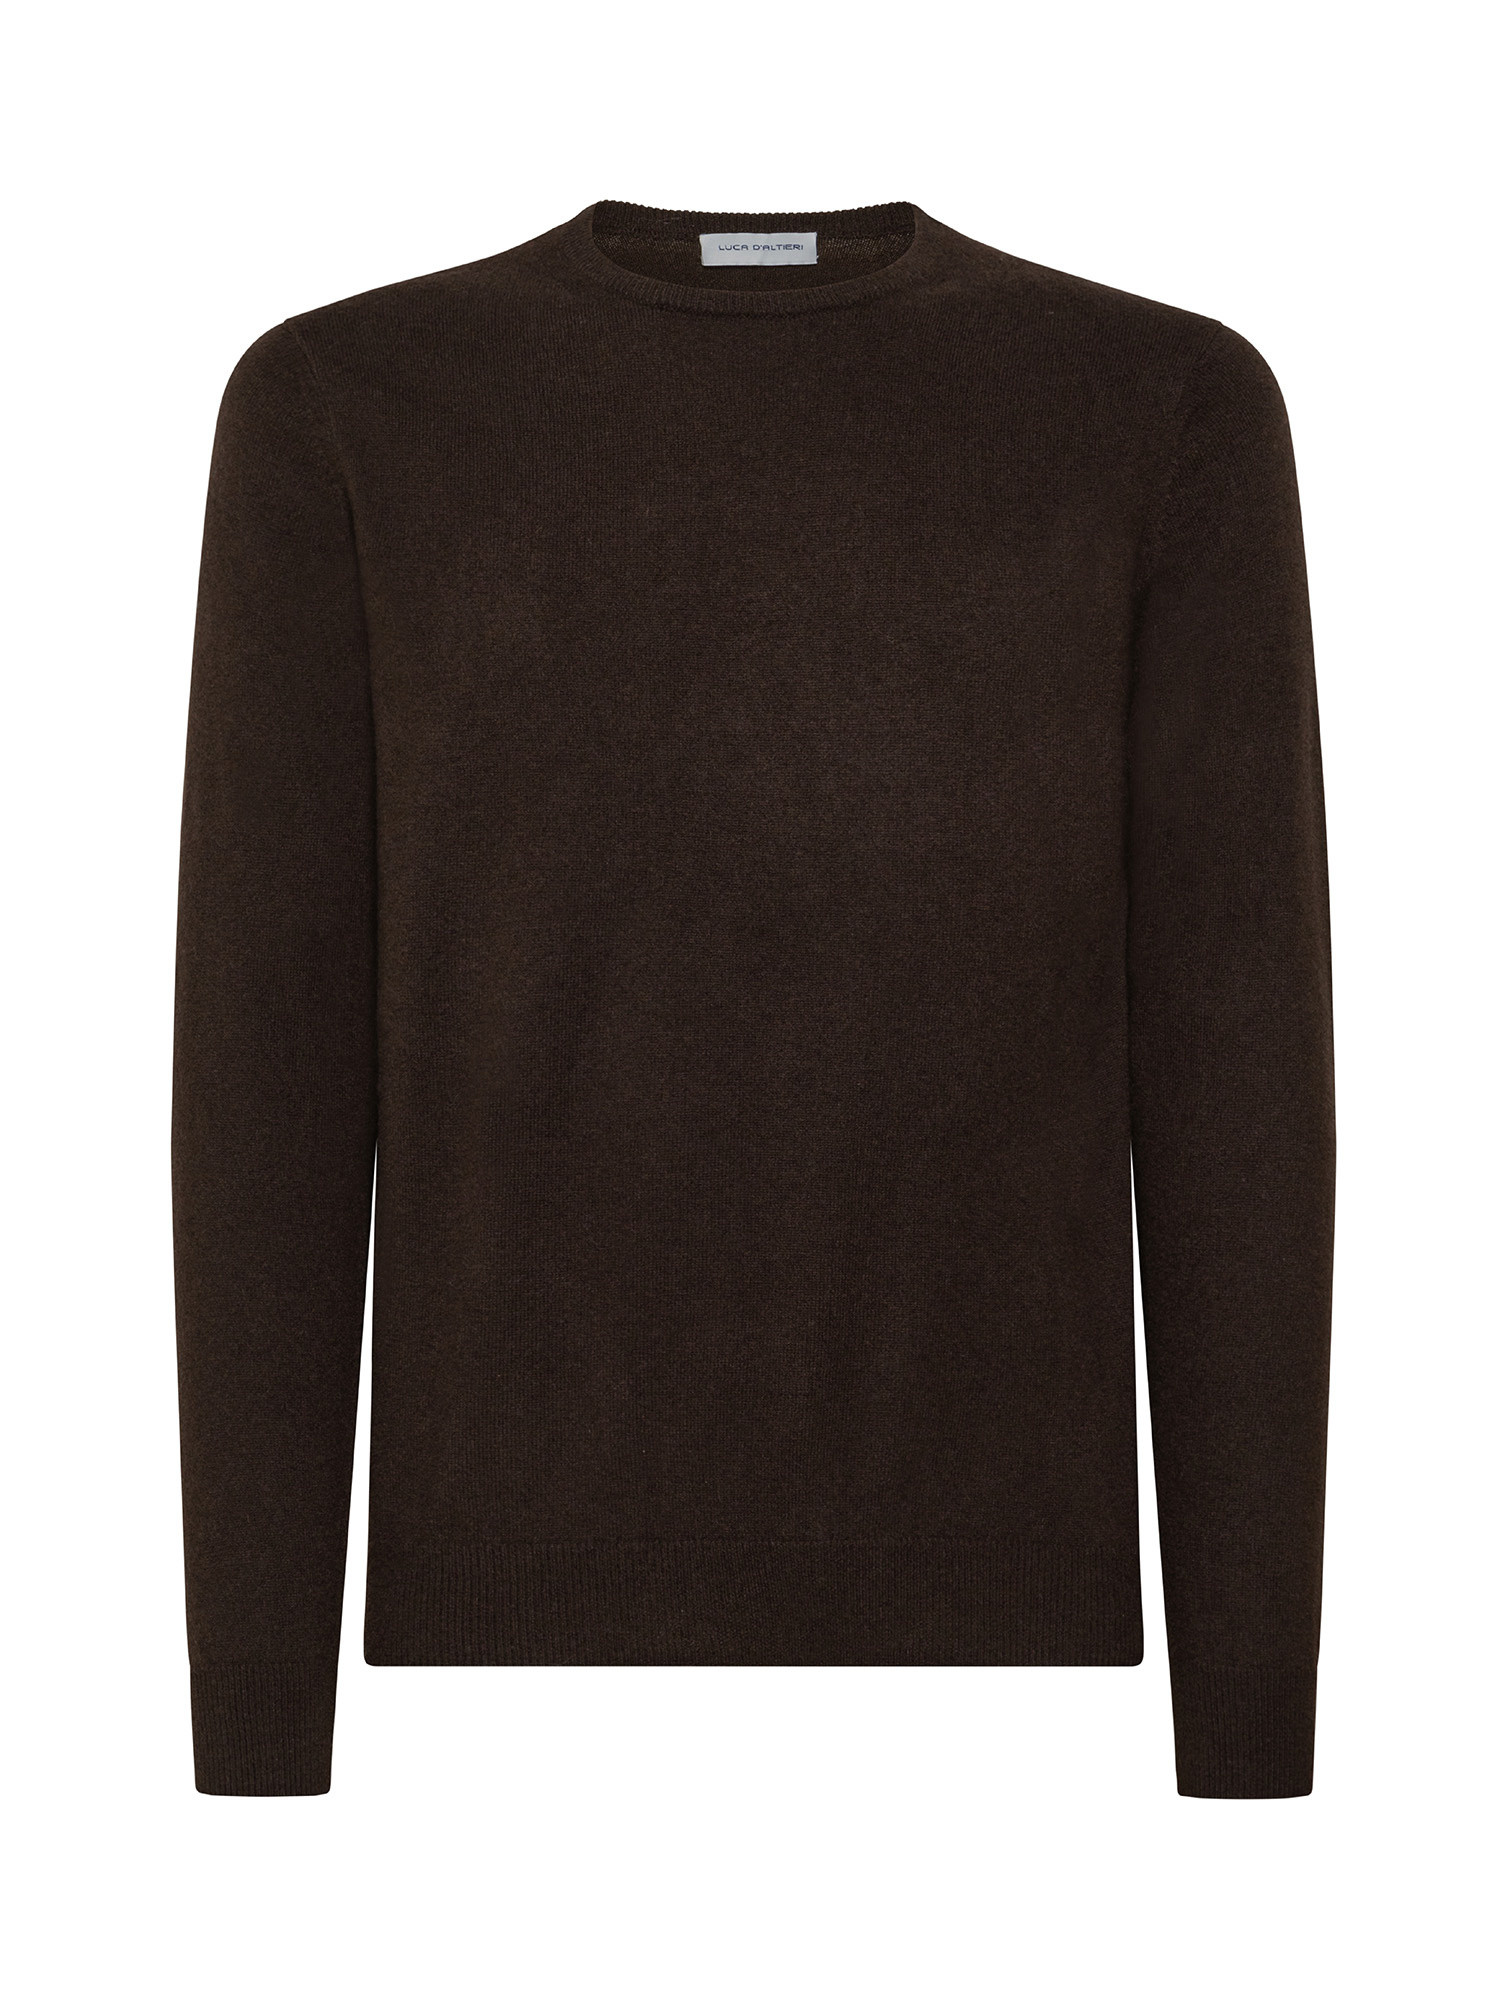 Pure cashmere crewneck pullover, Brown, large image number 0